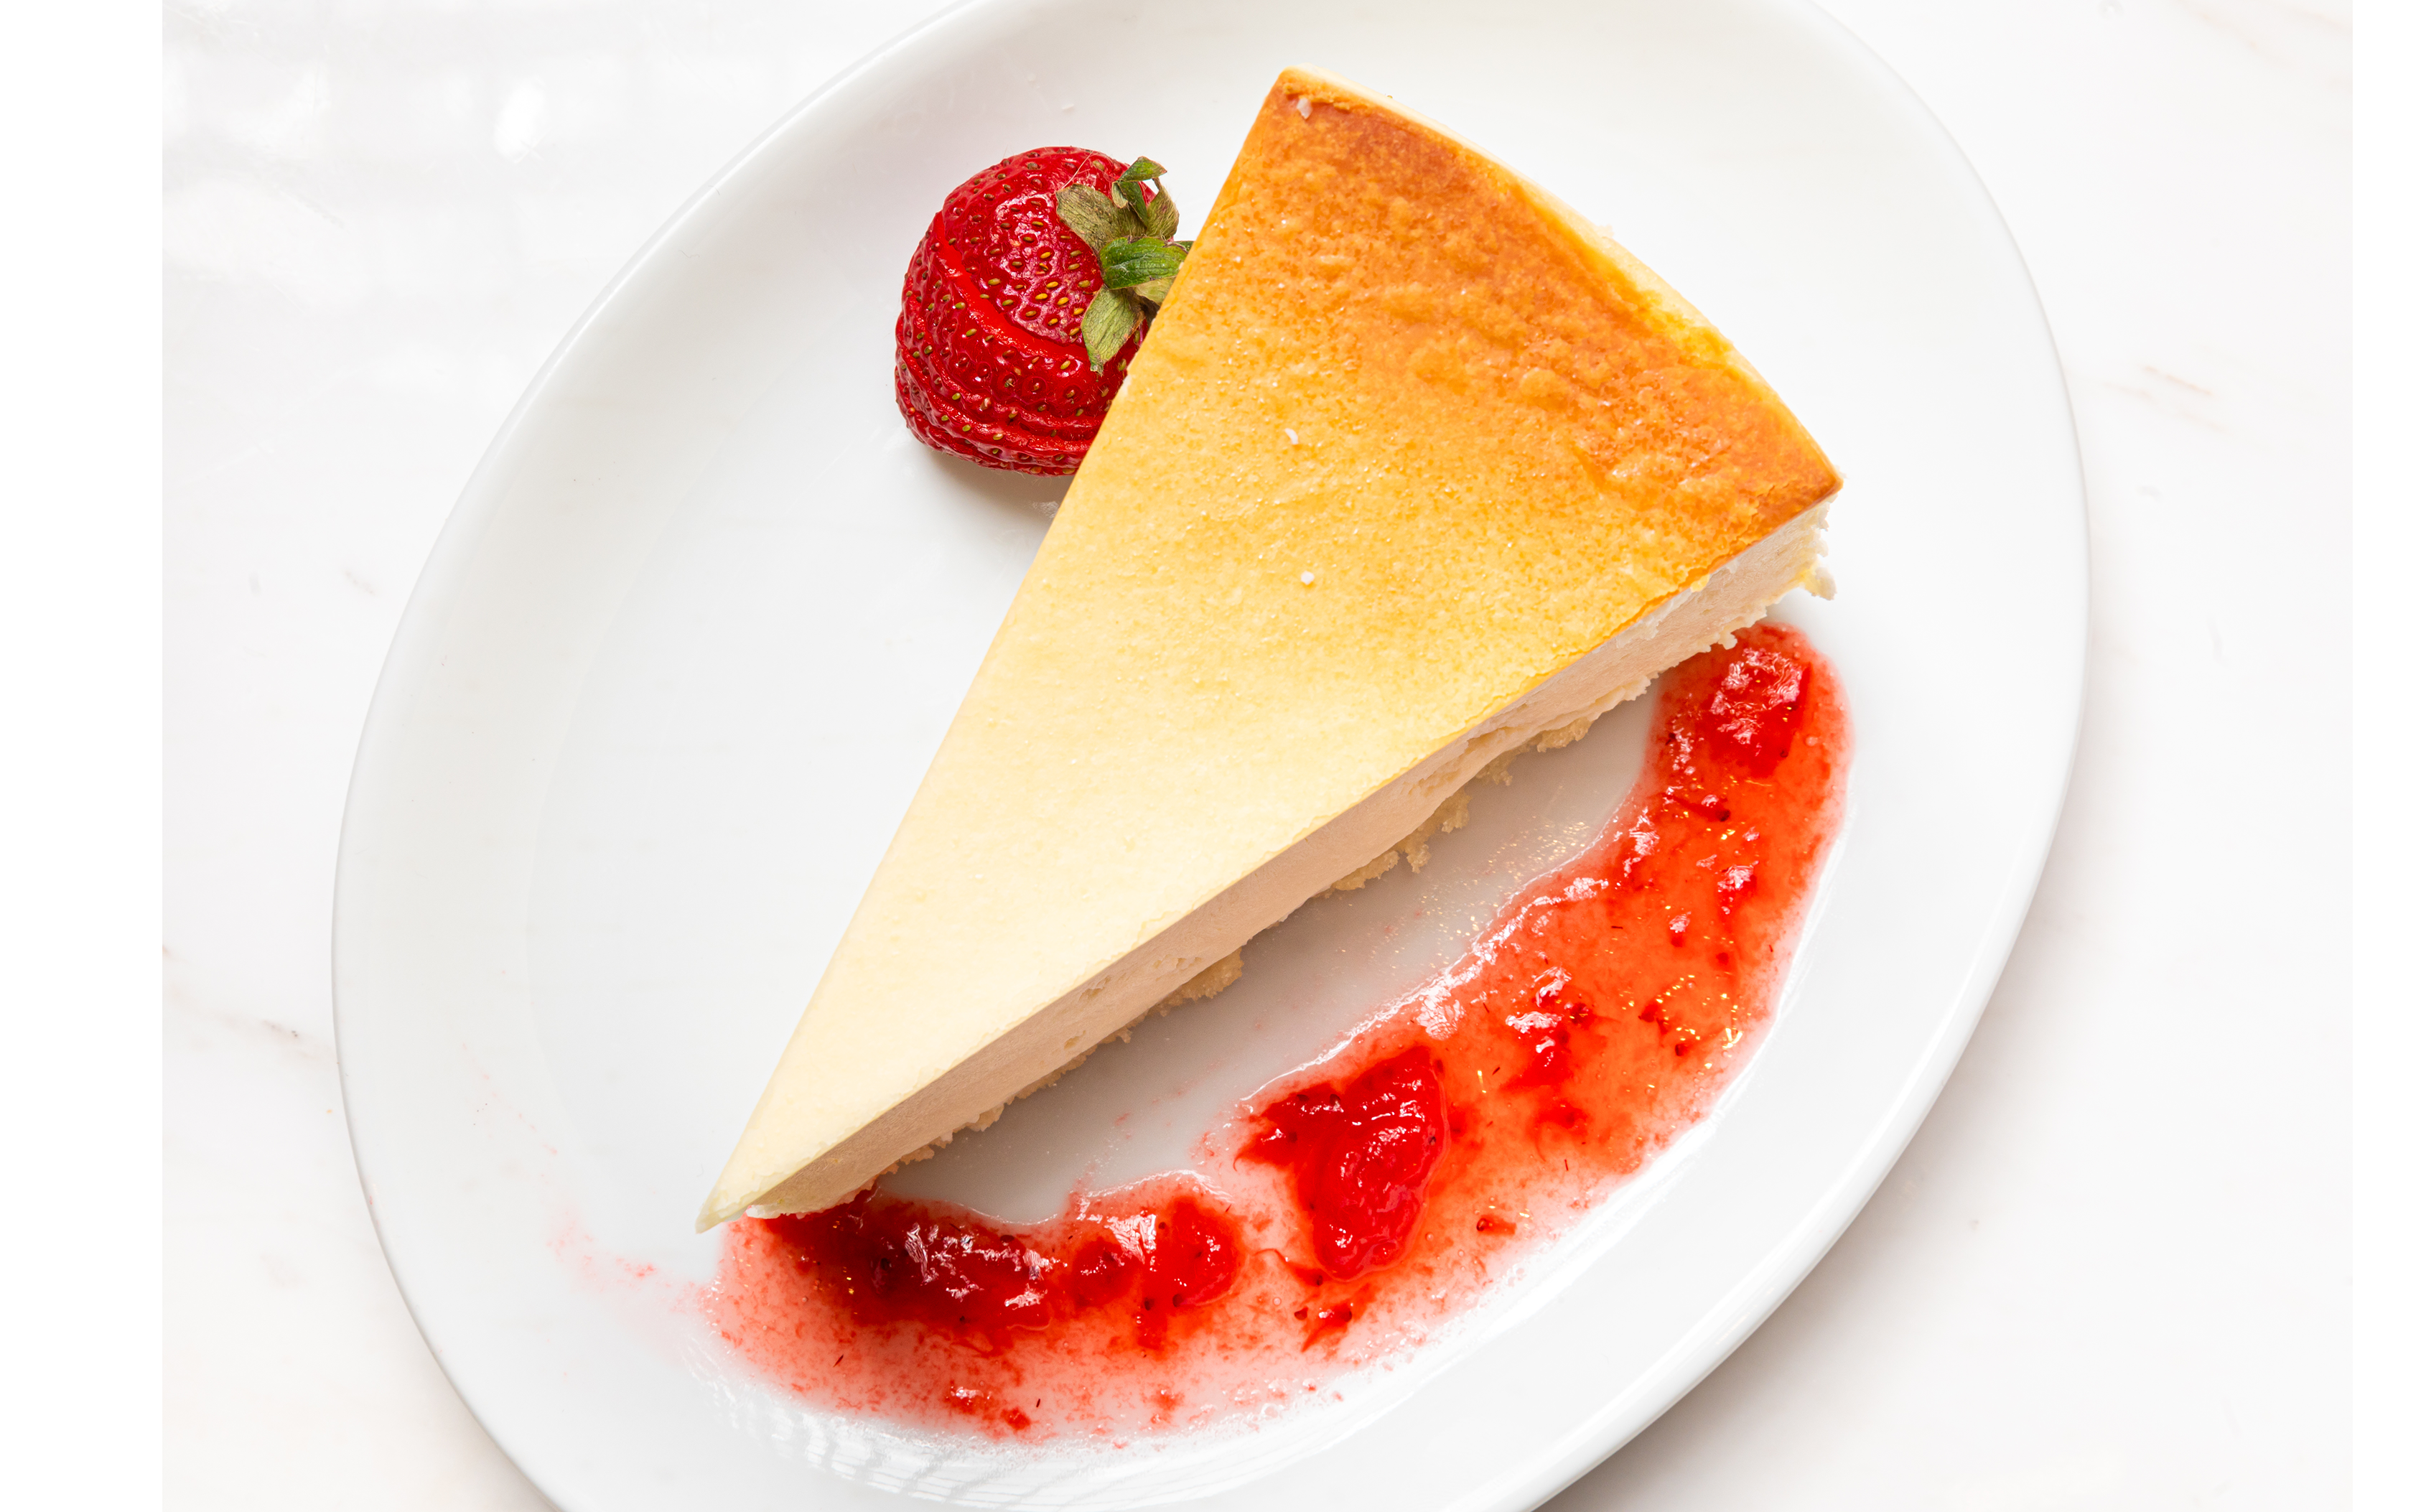 Junior’s brings more than its famous cheesecake to Resorts World